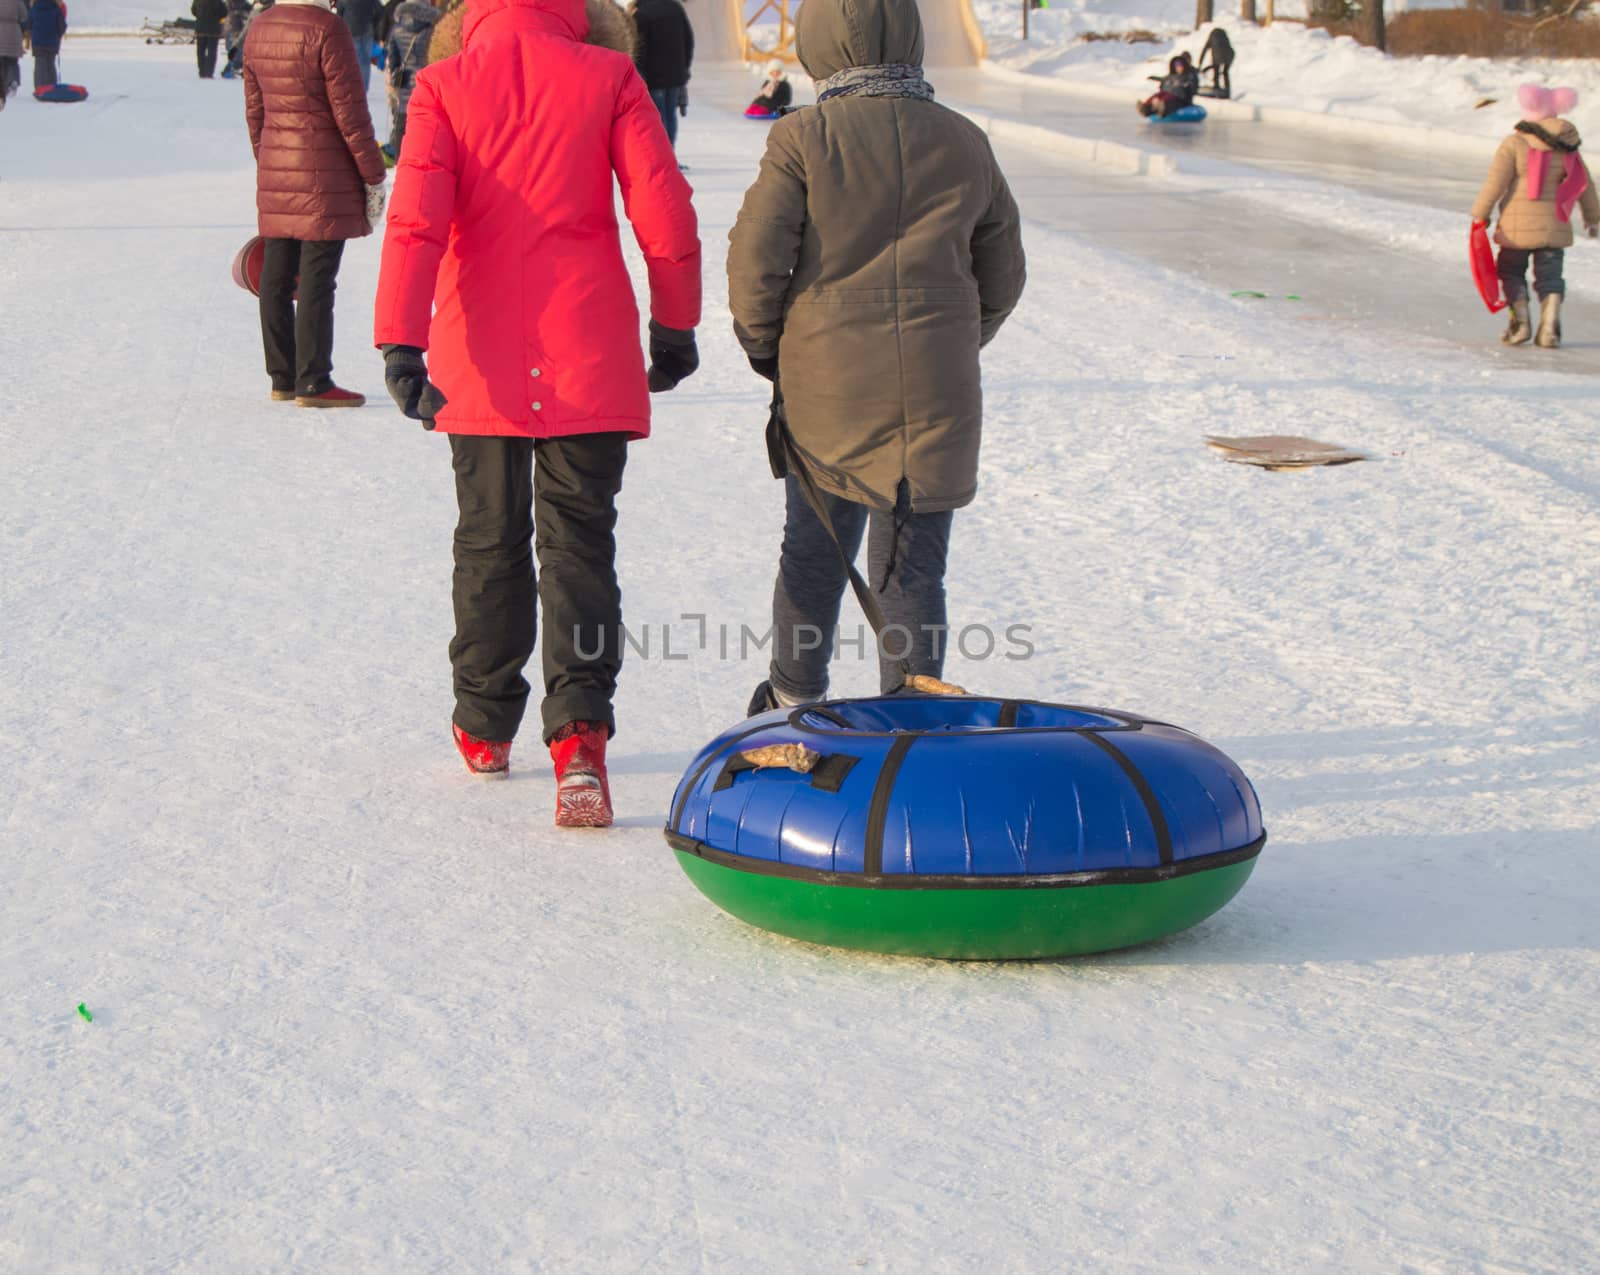 Two teen girls pull tubing after after sliding down the slope of an ice slide, winter fun in the Park by claire_lucia